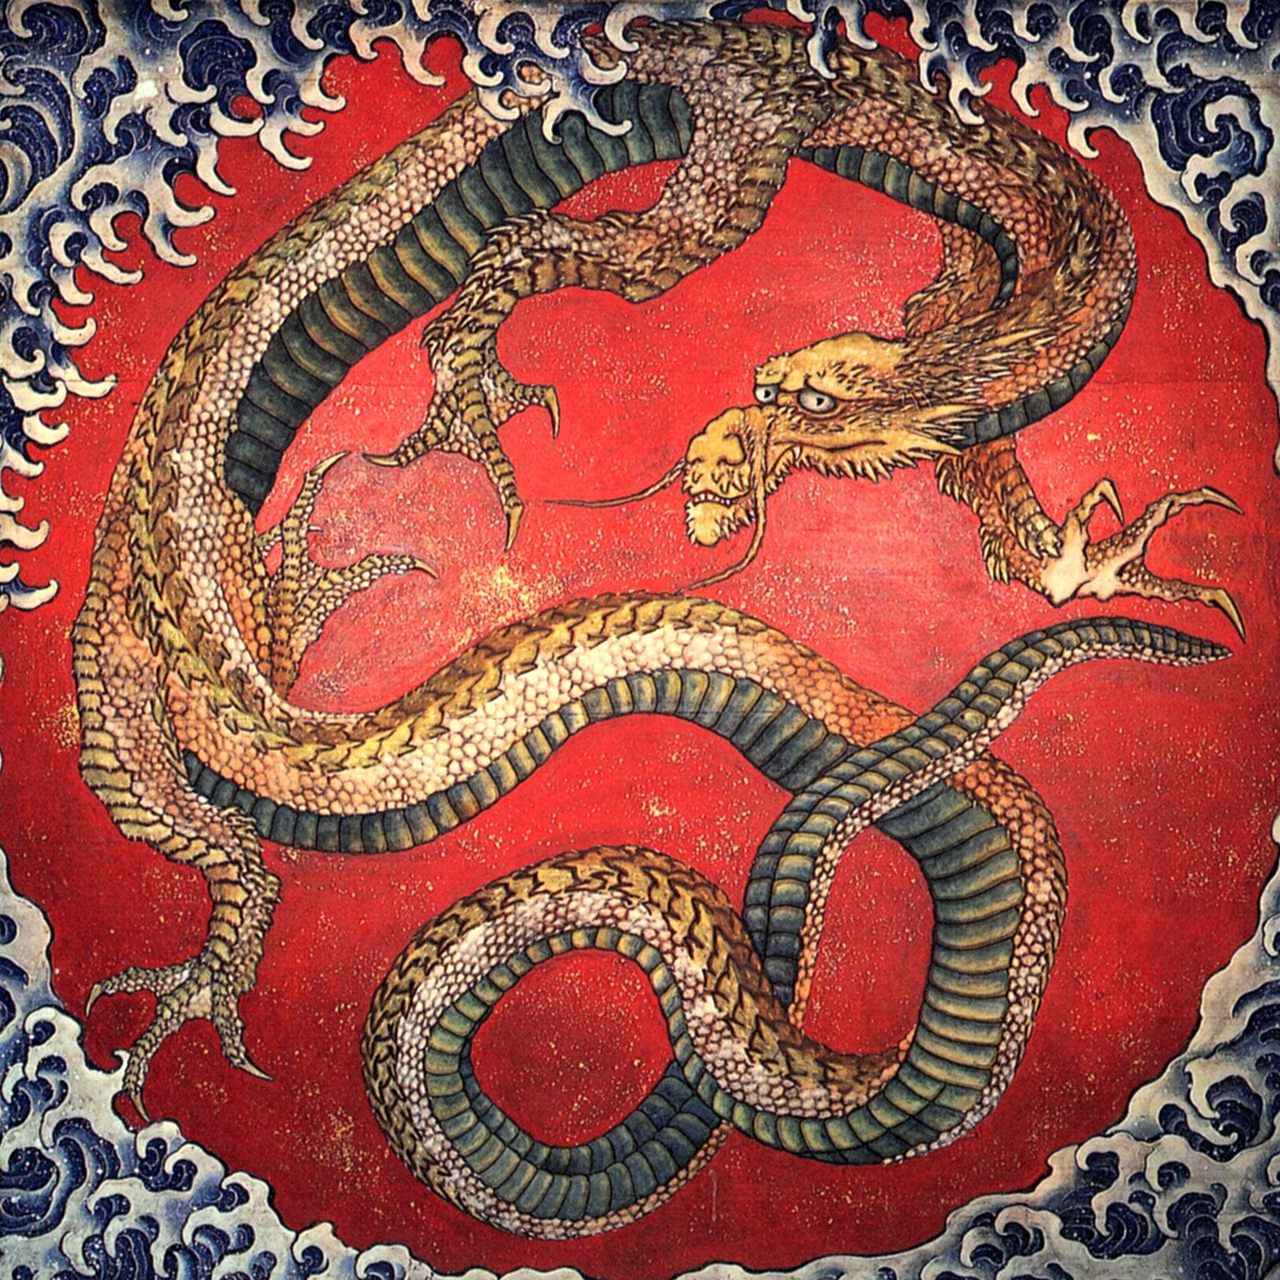 Dragons can be found across centuries and across cultures, and are something to celebrate as we enter the Year of the Dragon. 